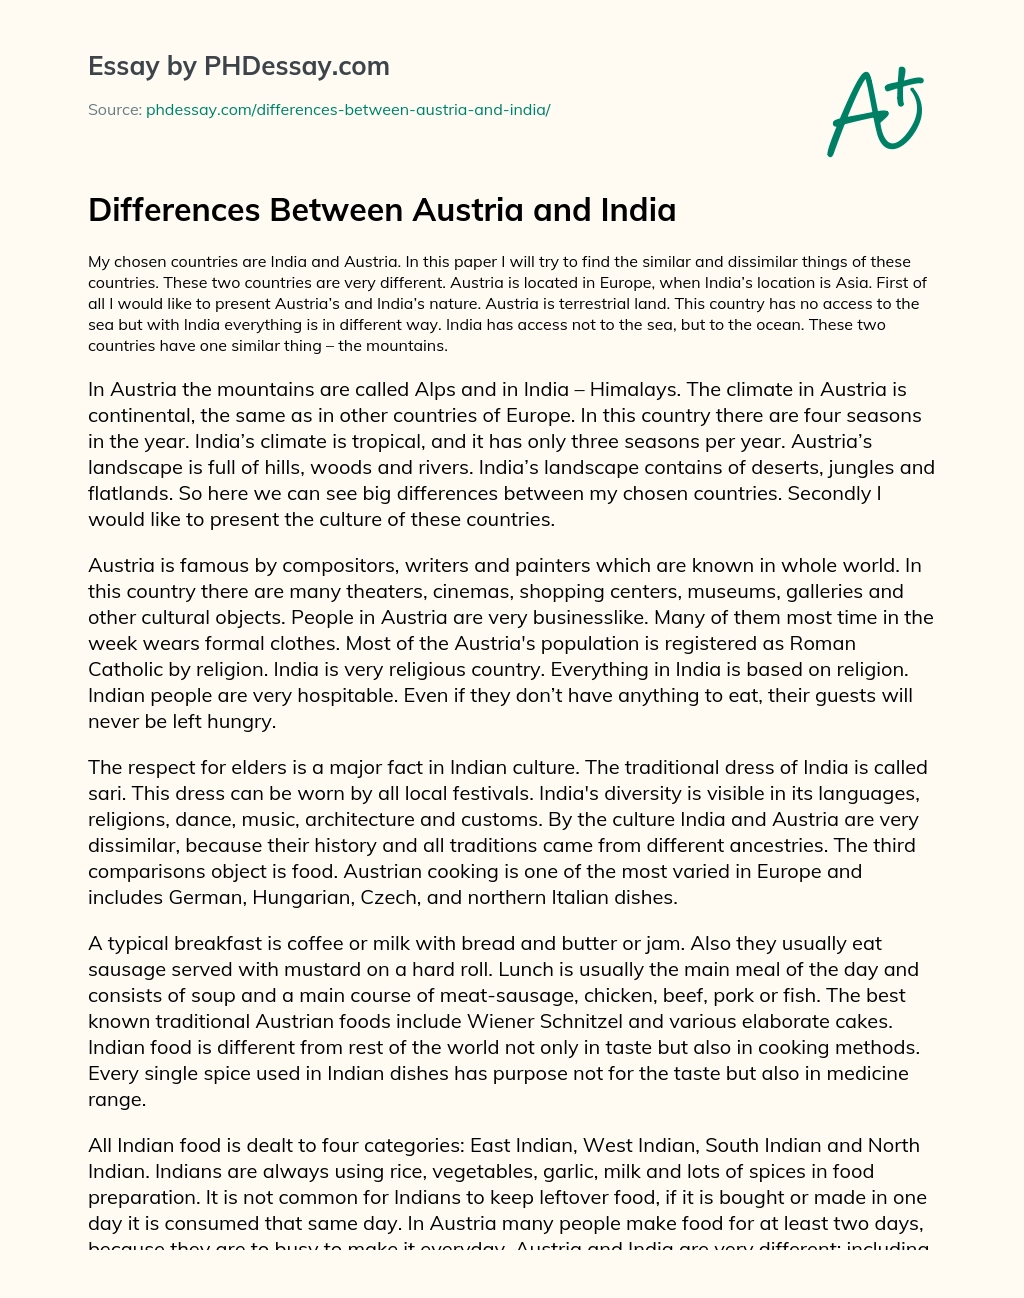 Differences Between Austria and India essay